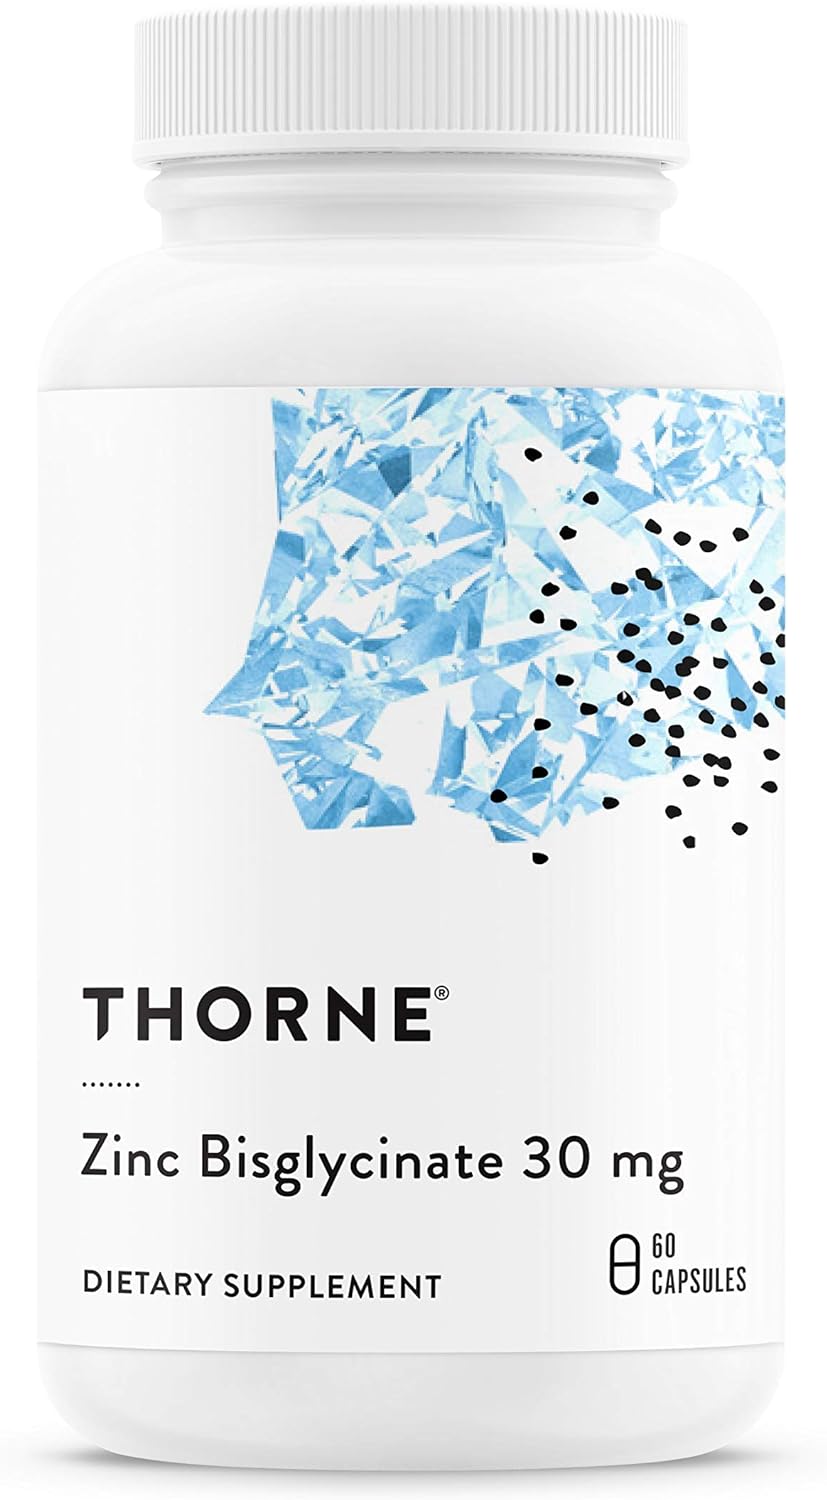 Thorne Zinc Bisglycinate 30mg - Daily Support for Skin, Eye & Immune System Health with Zinc Supplement Capsules - 60 Capsules